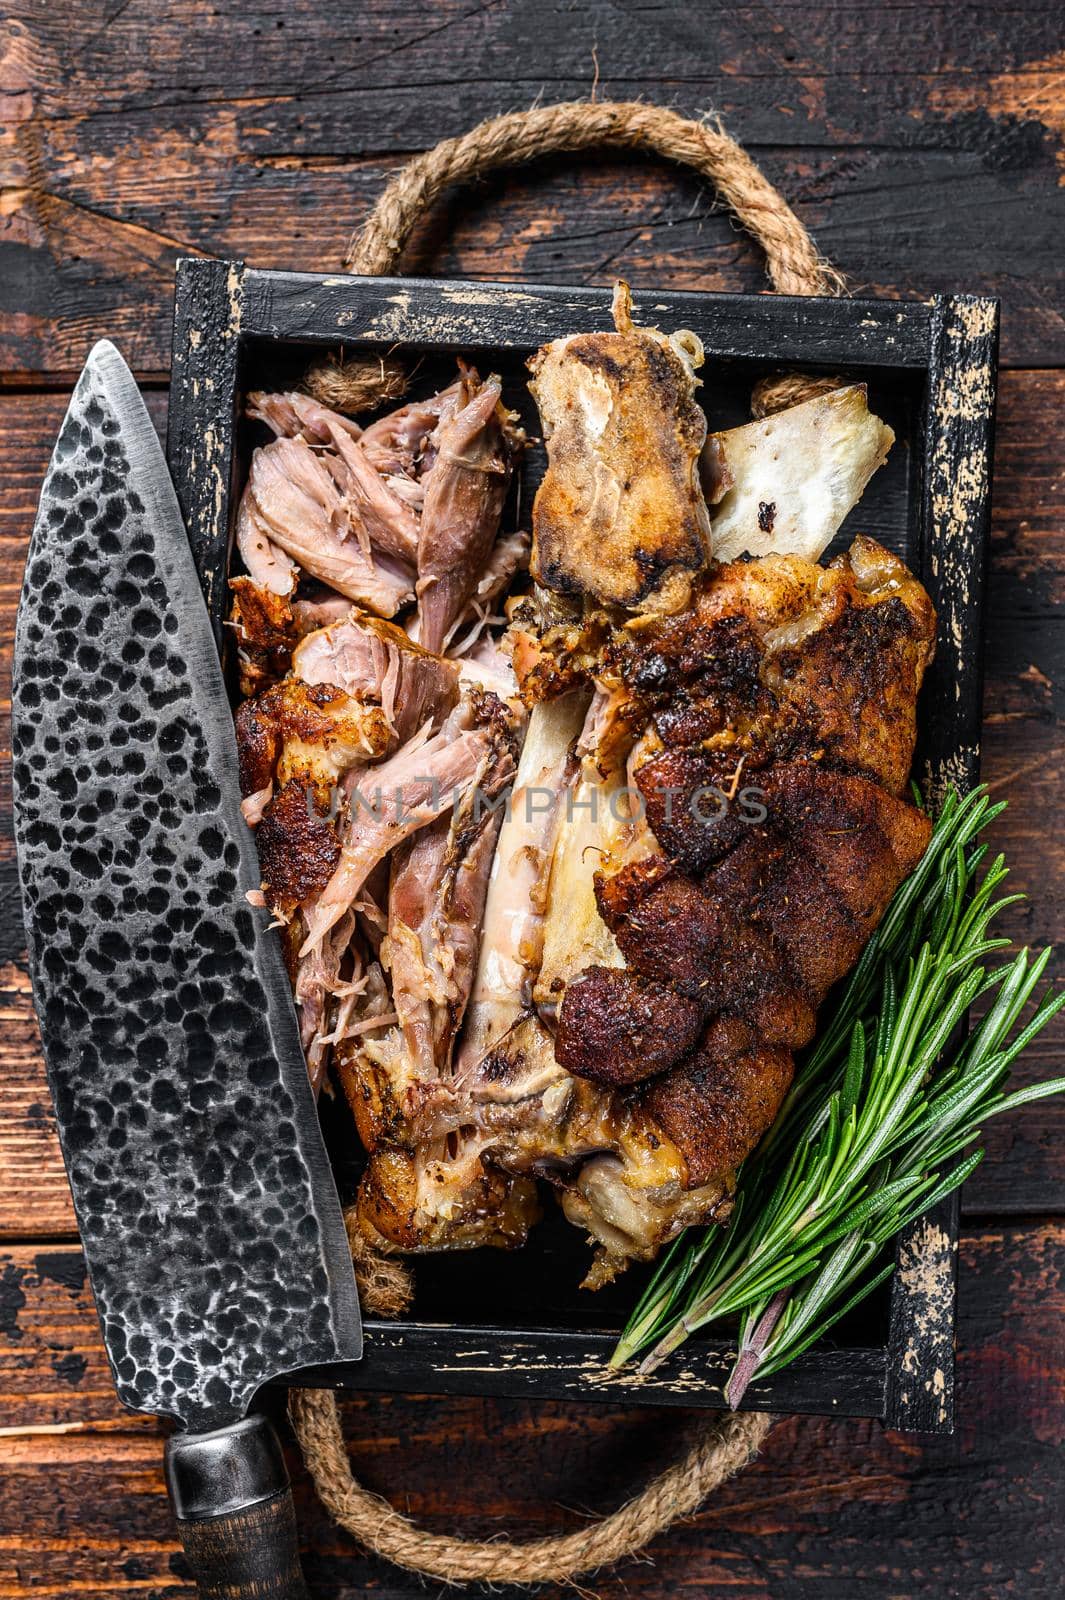 Roasted pork knuckle eisbein meat in a wooden tray with knife. Dark wooden background. Top view by Composter